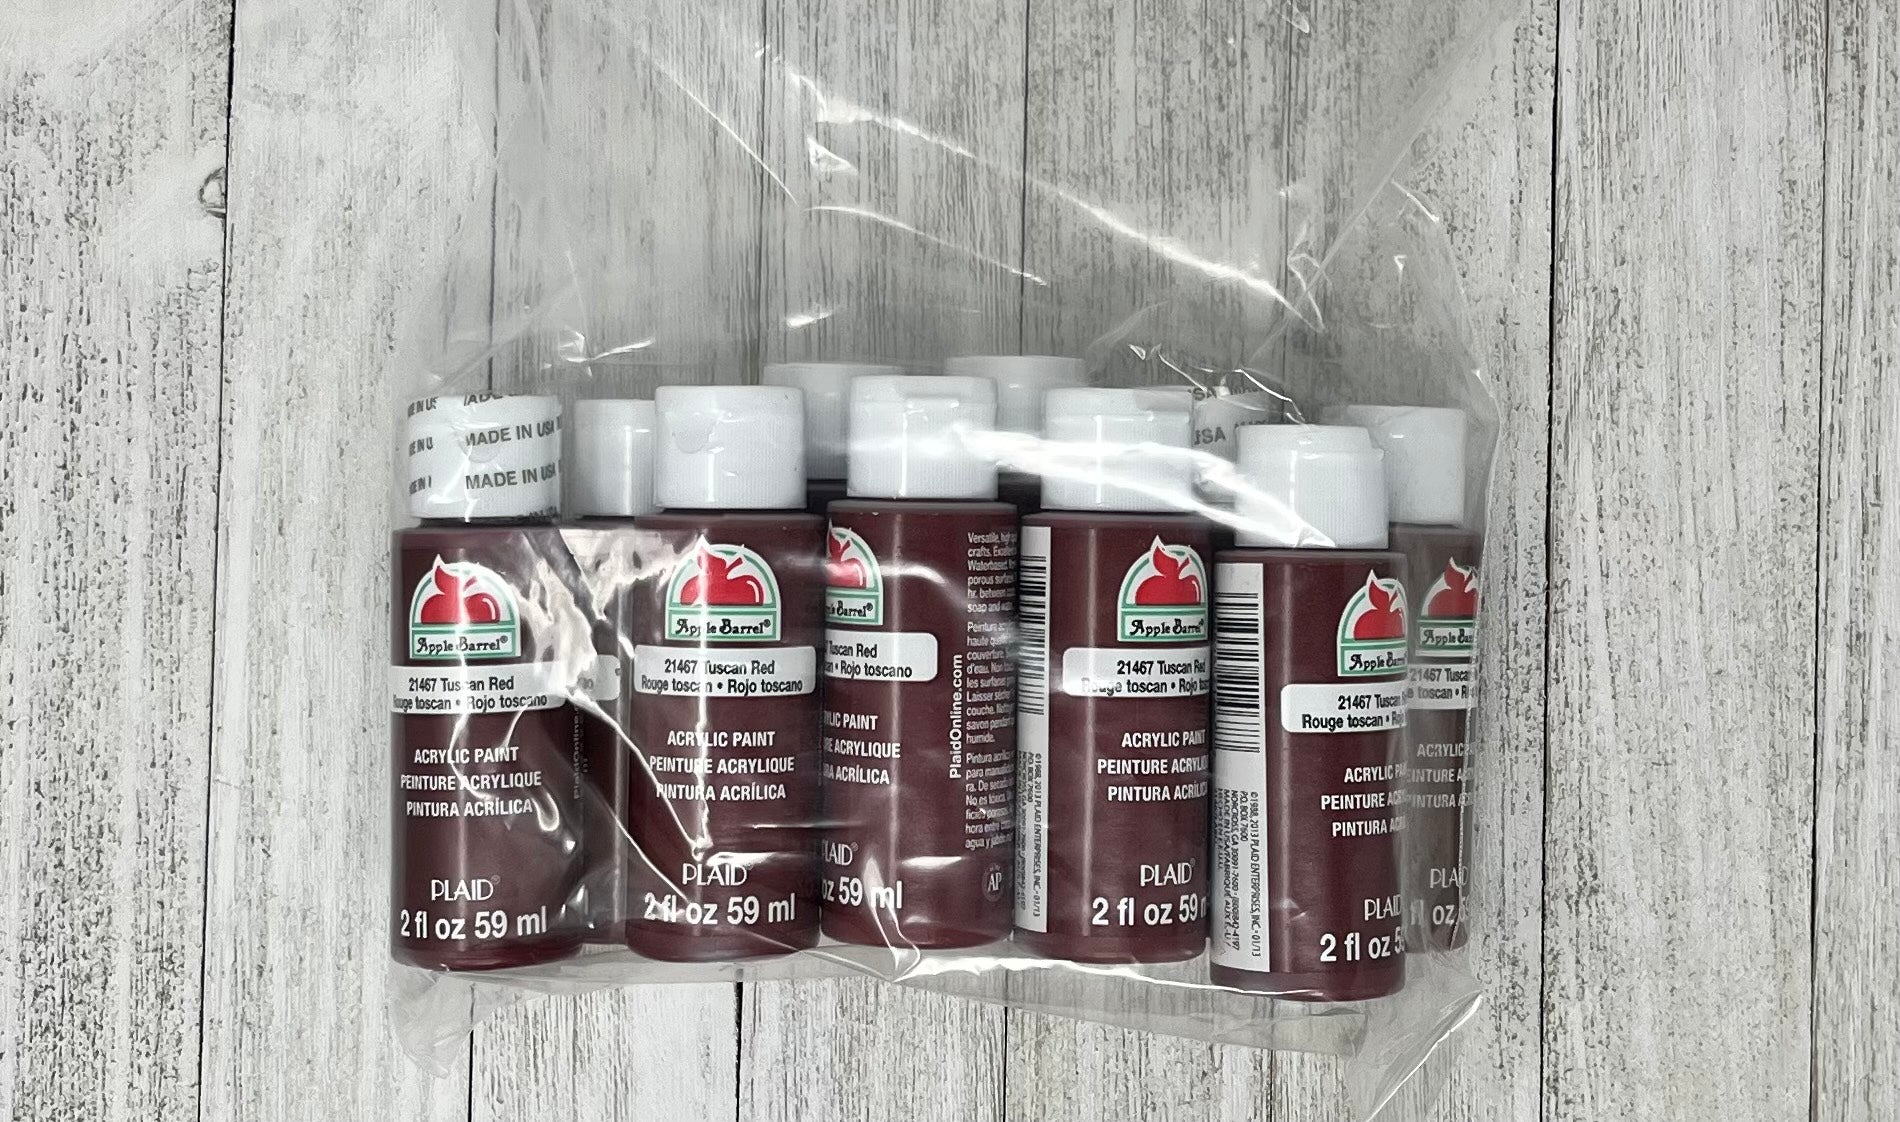 Lot of 10 Apple Barrel—Tuscan Red 2 fl oz acrylic paints – The Mindful Heart